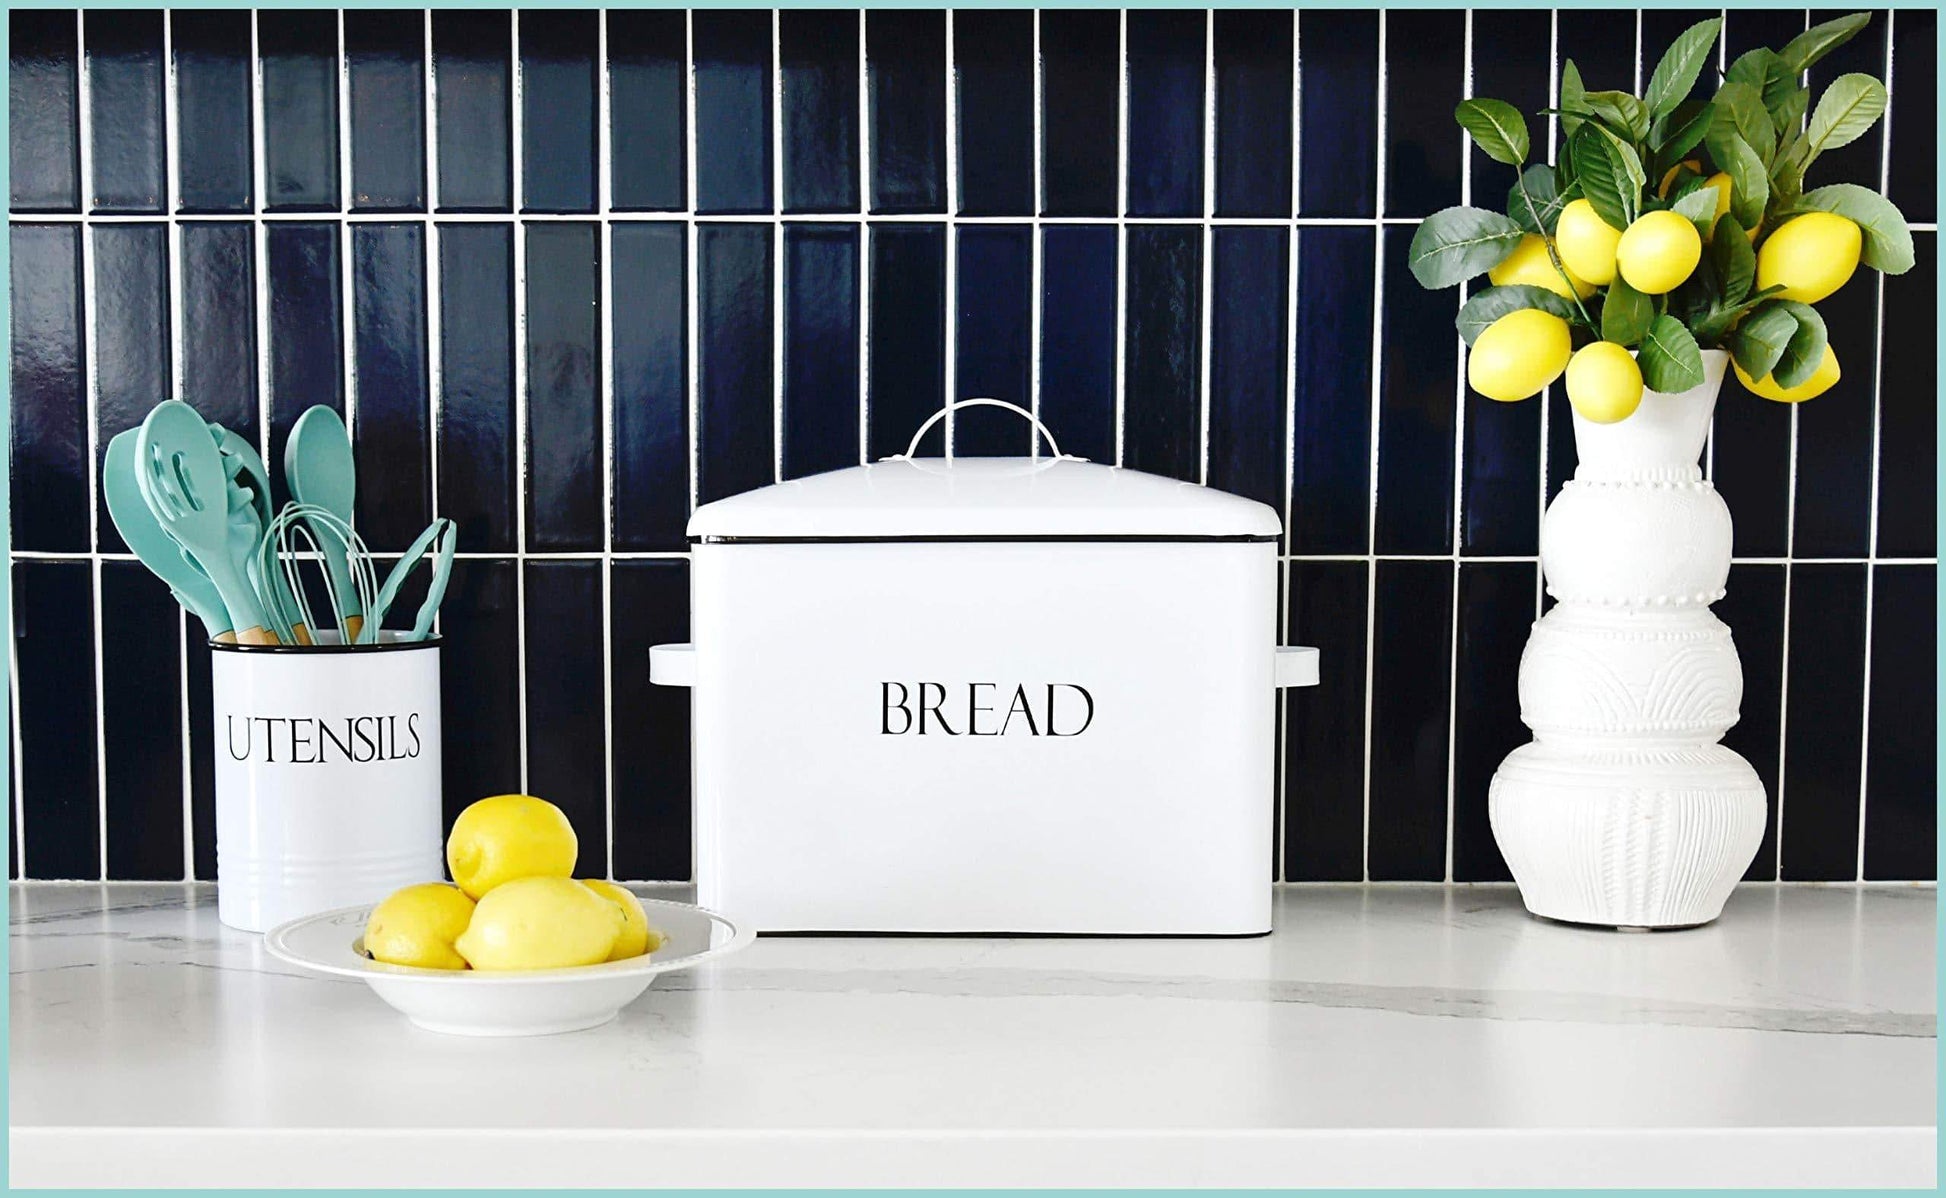 Products outshine vintage metal bread bin countertop space saving extra large high capacity bread storage box for your kitchen holds 2 loaves 13 x 10 x 7 white with bread lettering